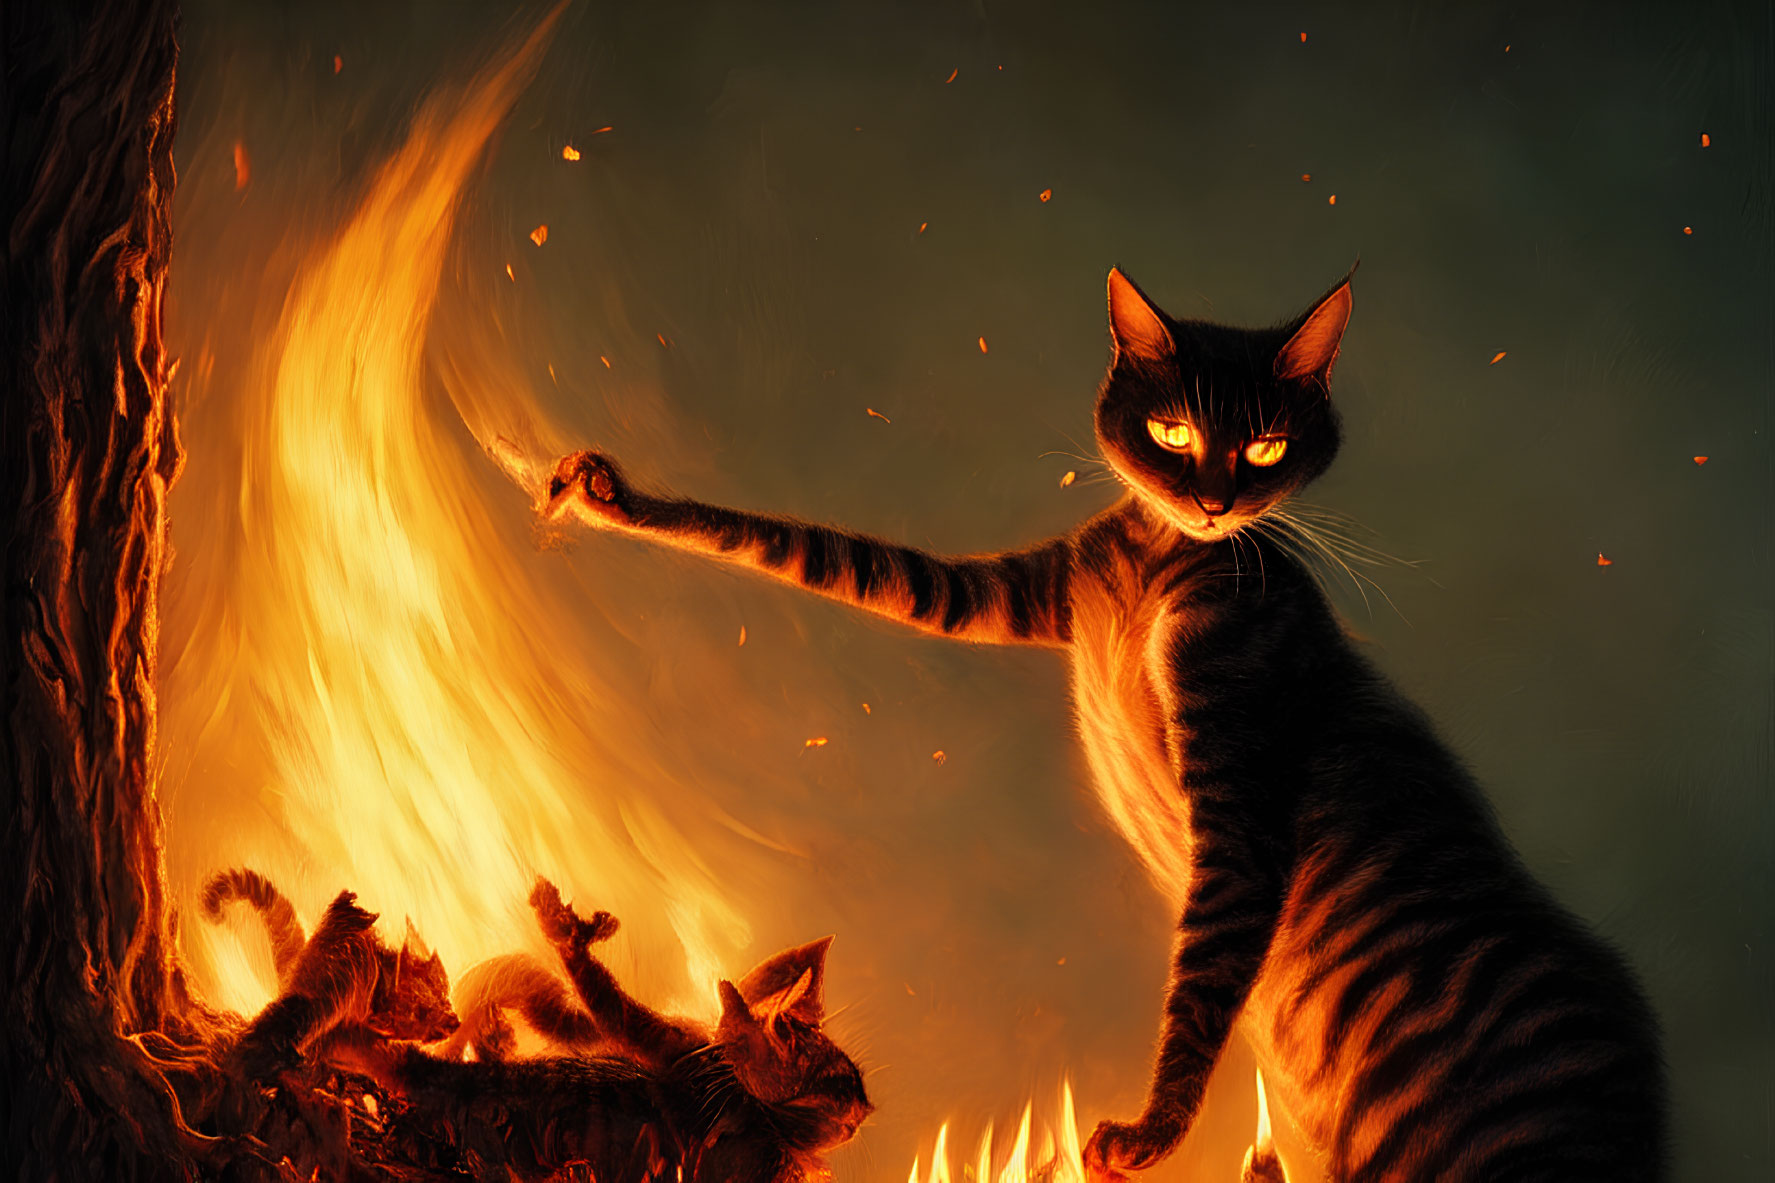 Sinister black cat with glowing eyes in front of fire and smaller cats